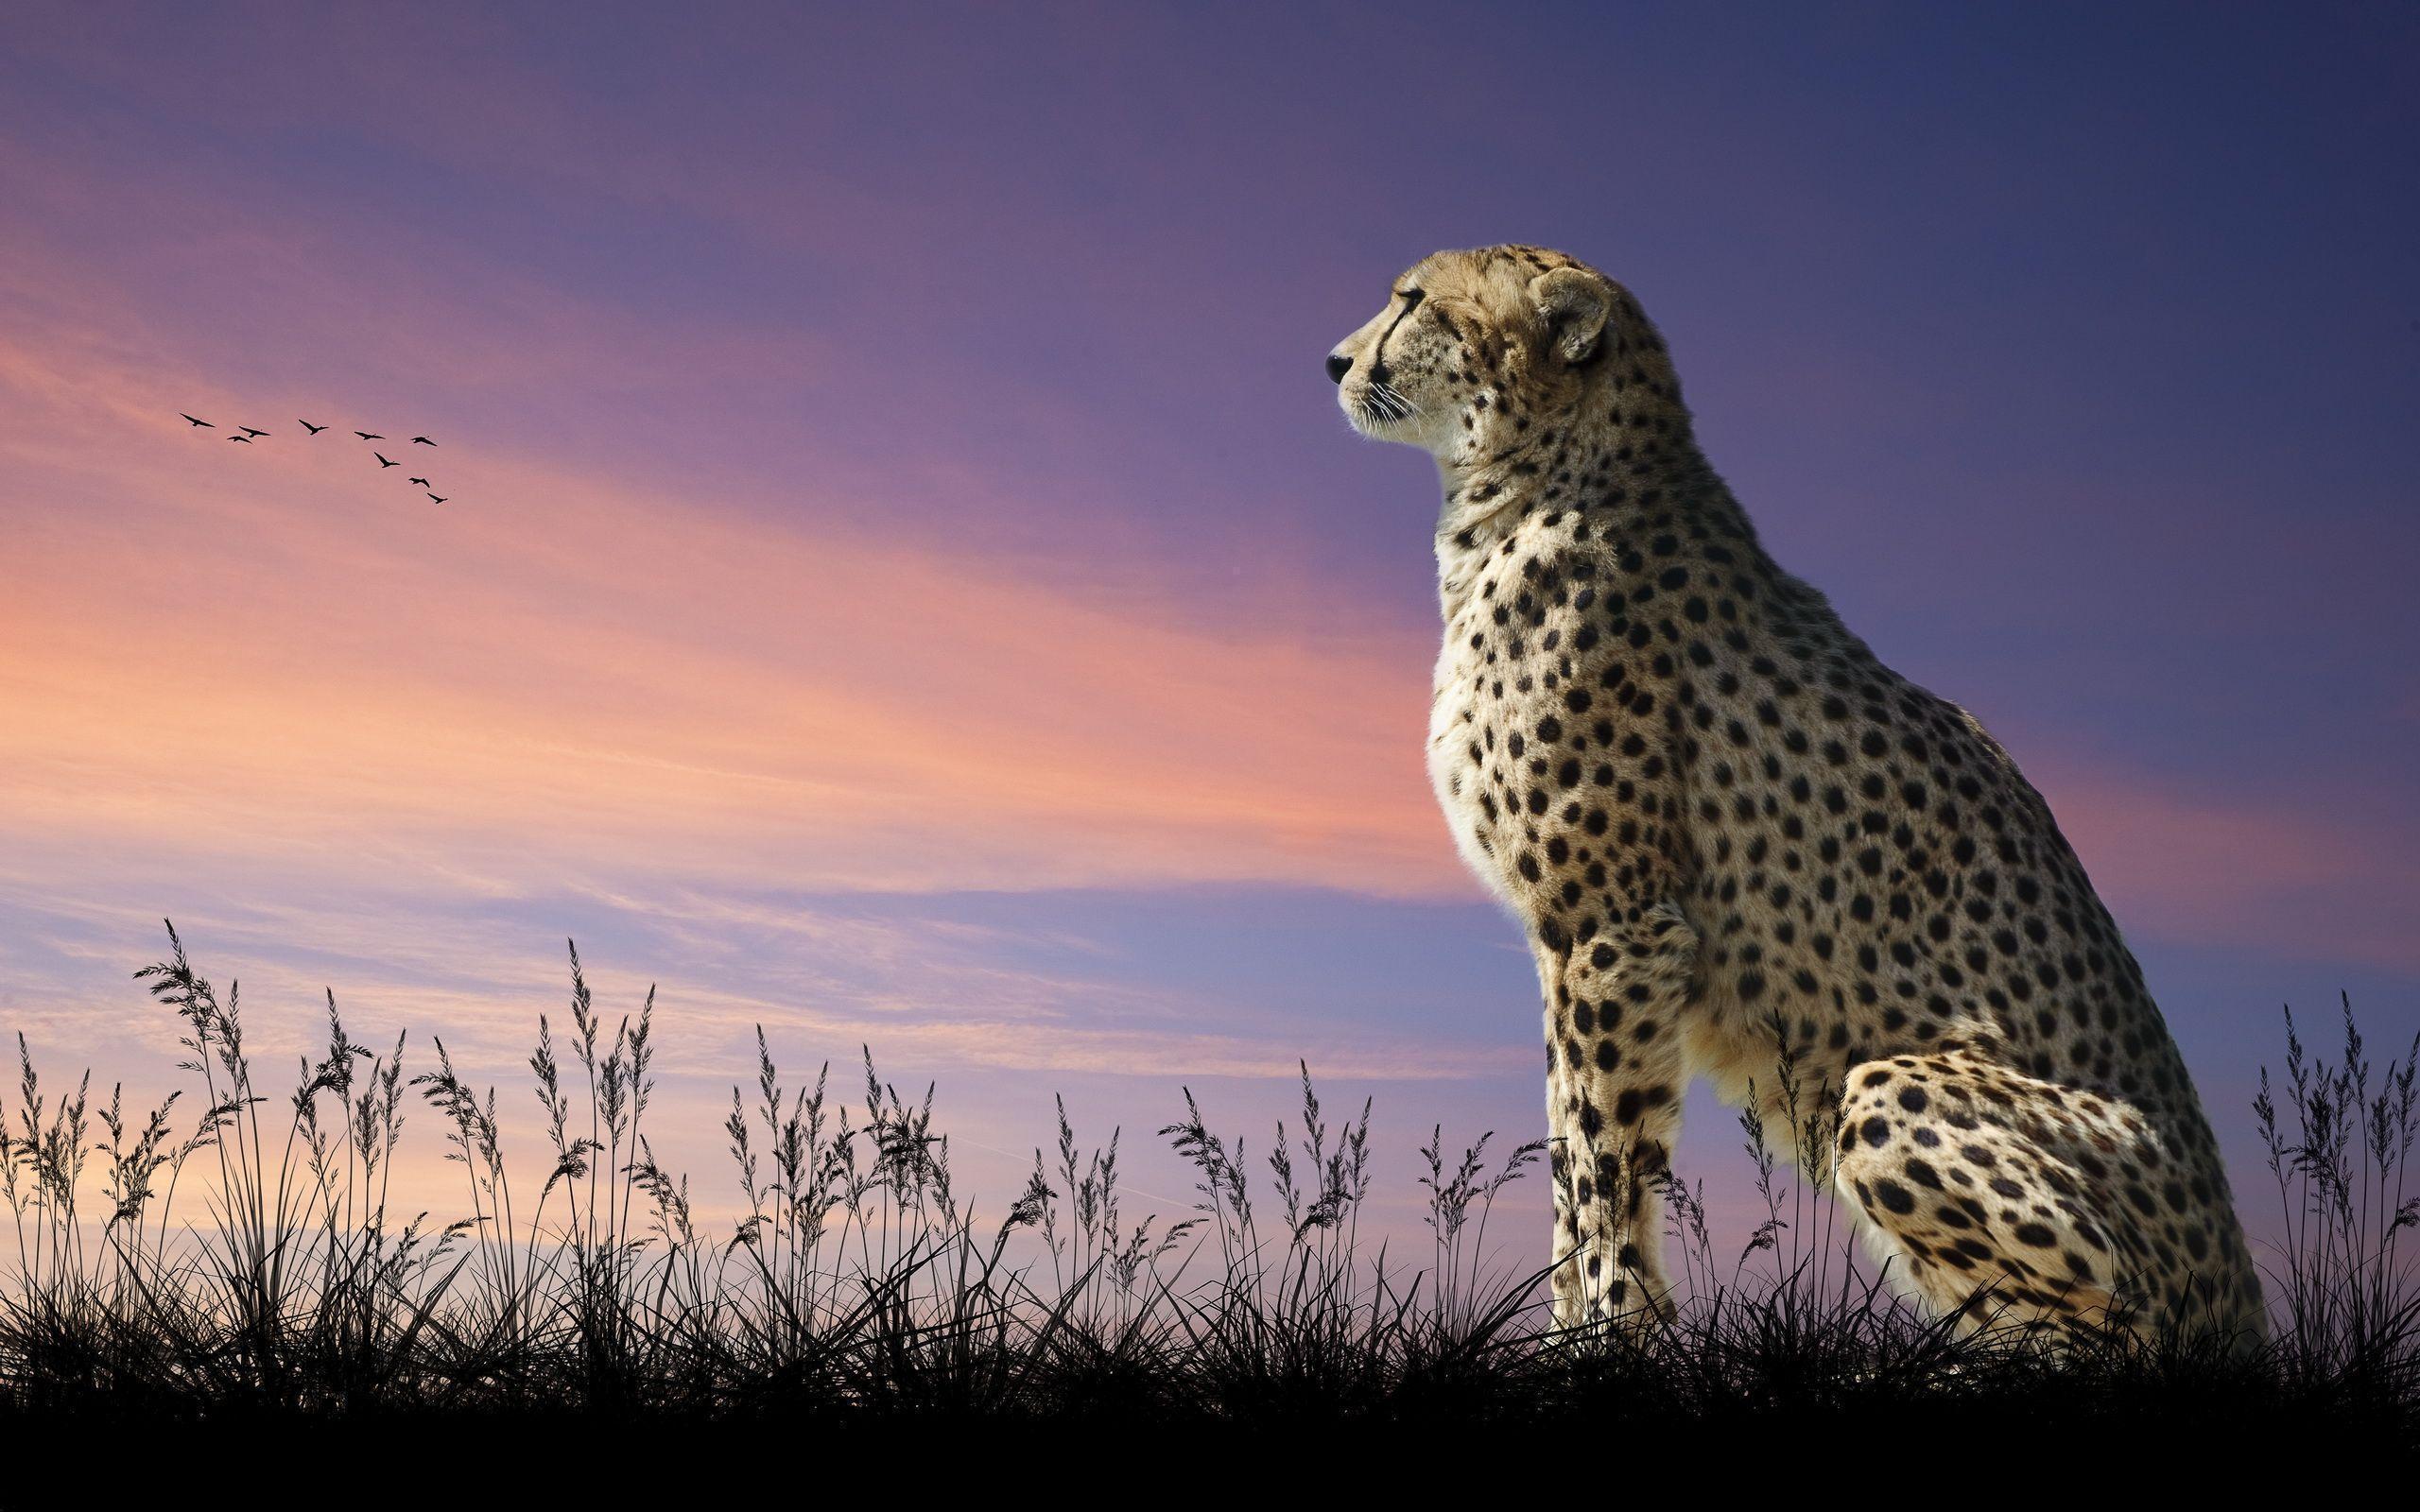 Cheetah HD Wallpaper and Background Image